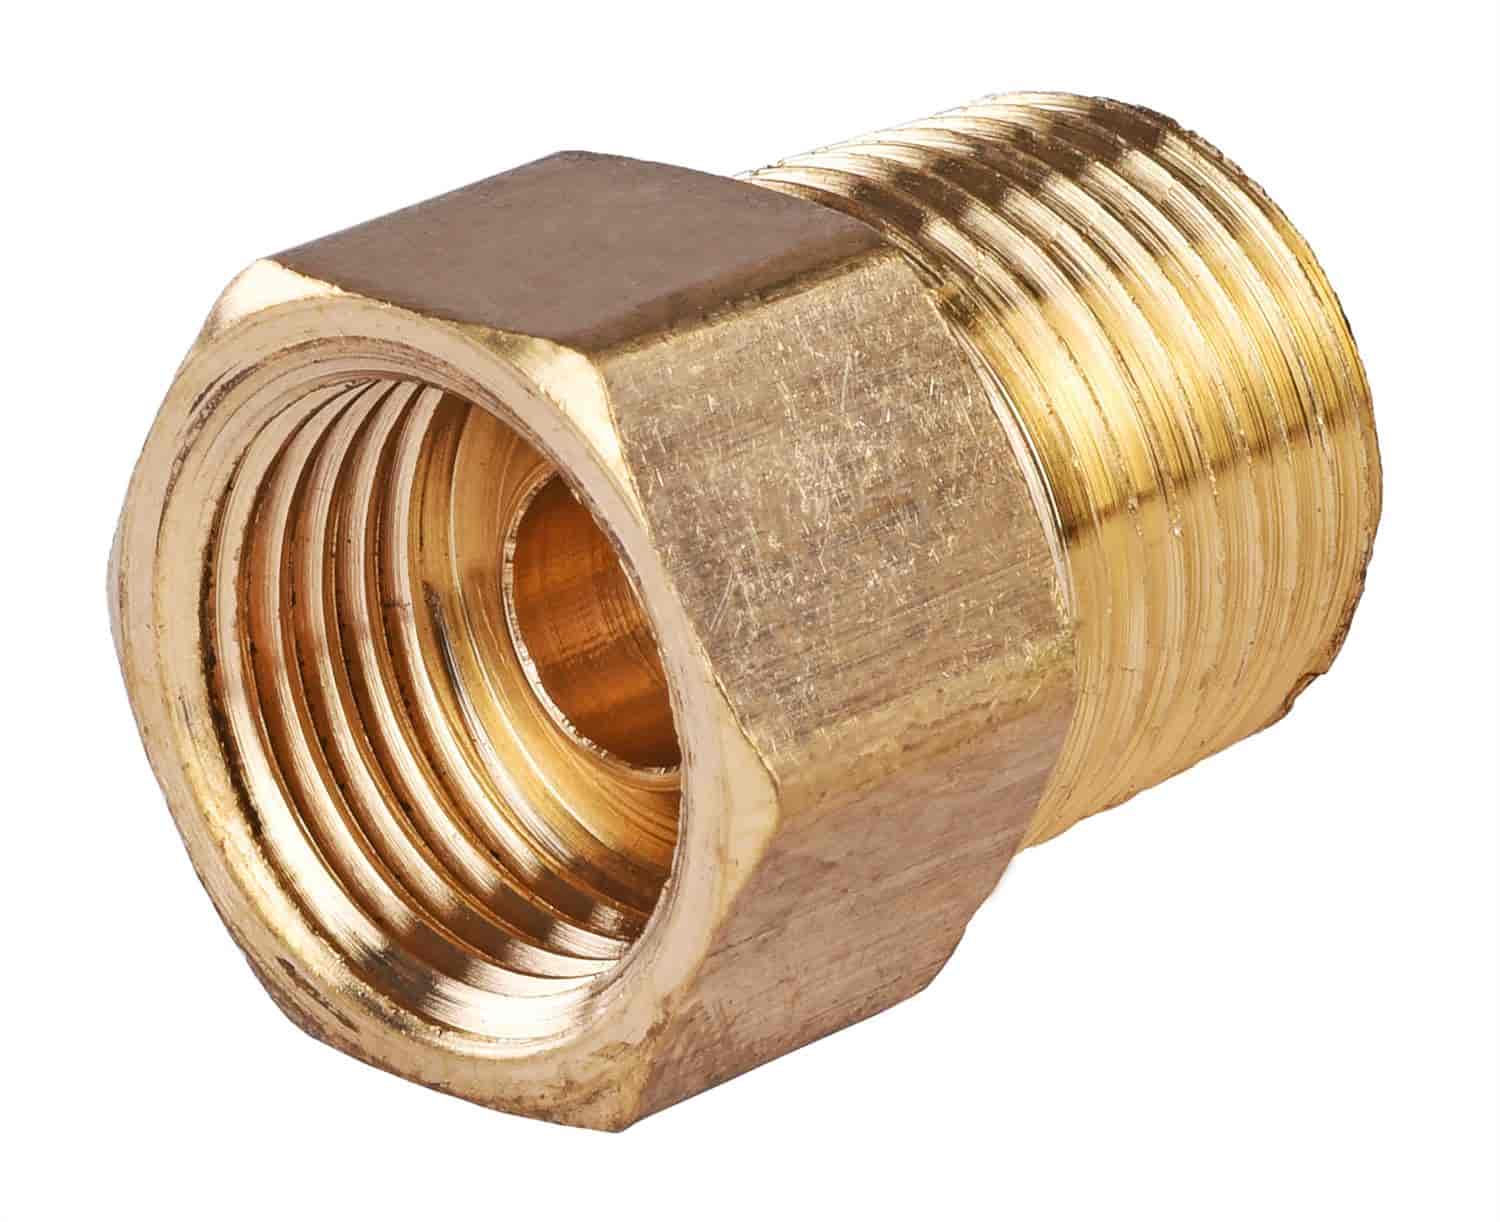 JEGS 63248: Brass Adapter Fittings, 3/8 in. NTP x 5/8 in. -18 Inverted  Flare Female, Fits 3/8 in. Hard Line